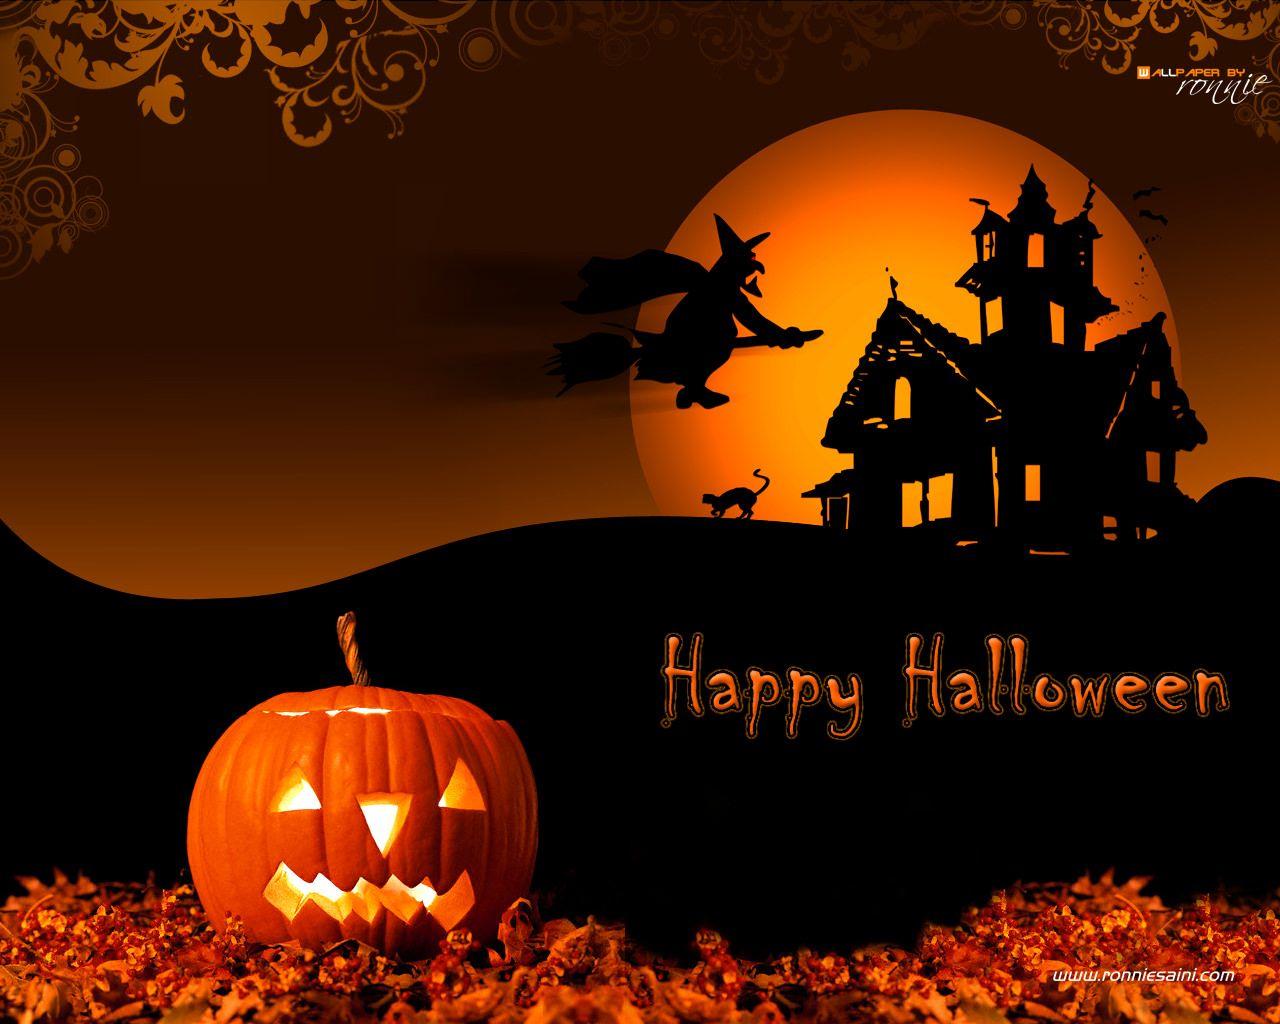 Happy Halloween with Guitars Wallpaper at